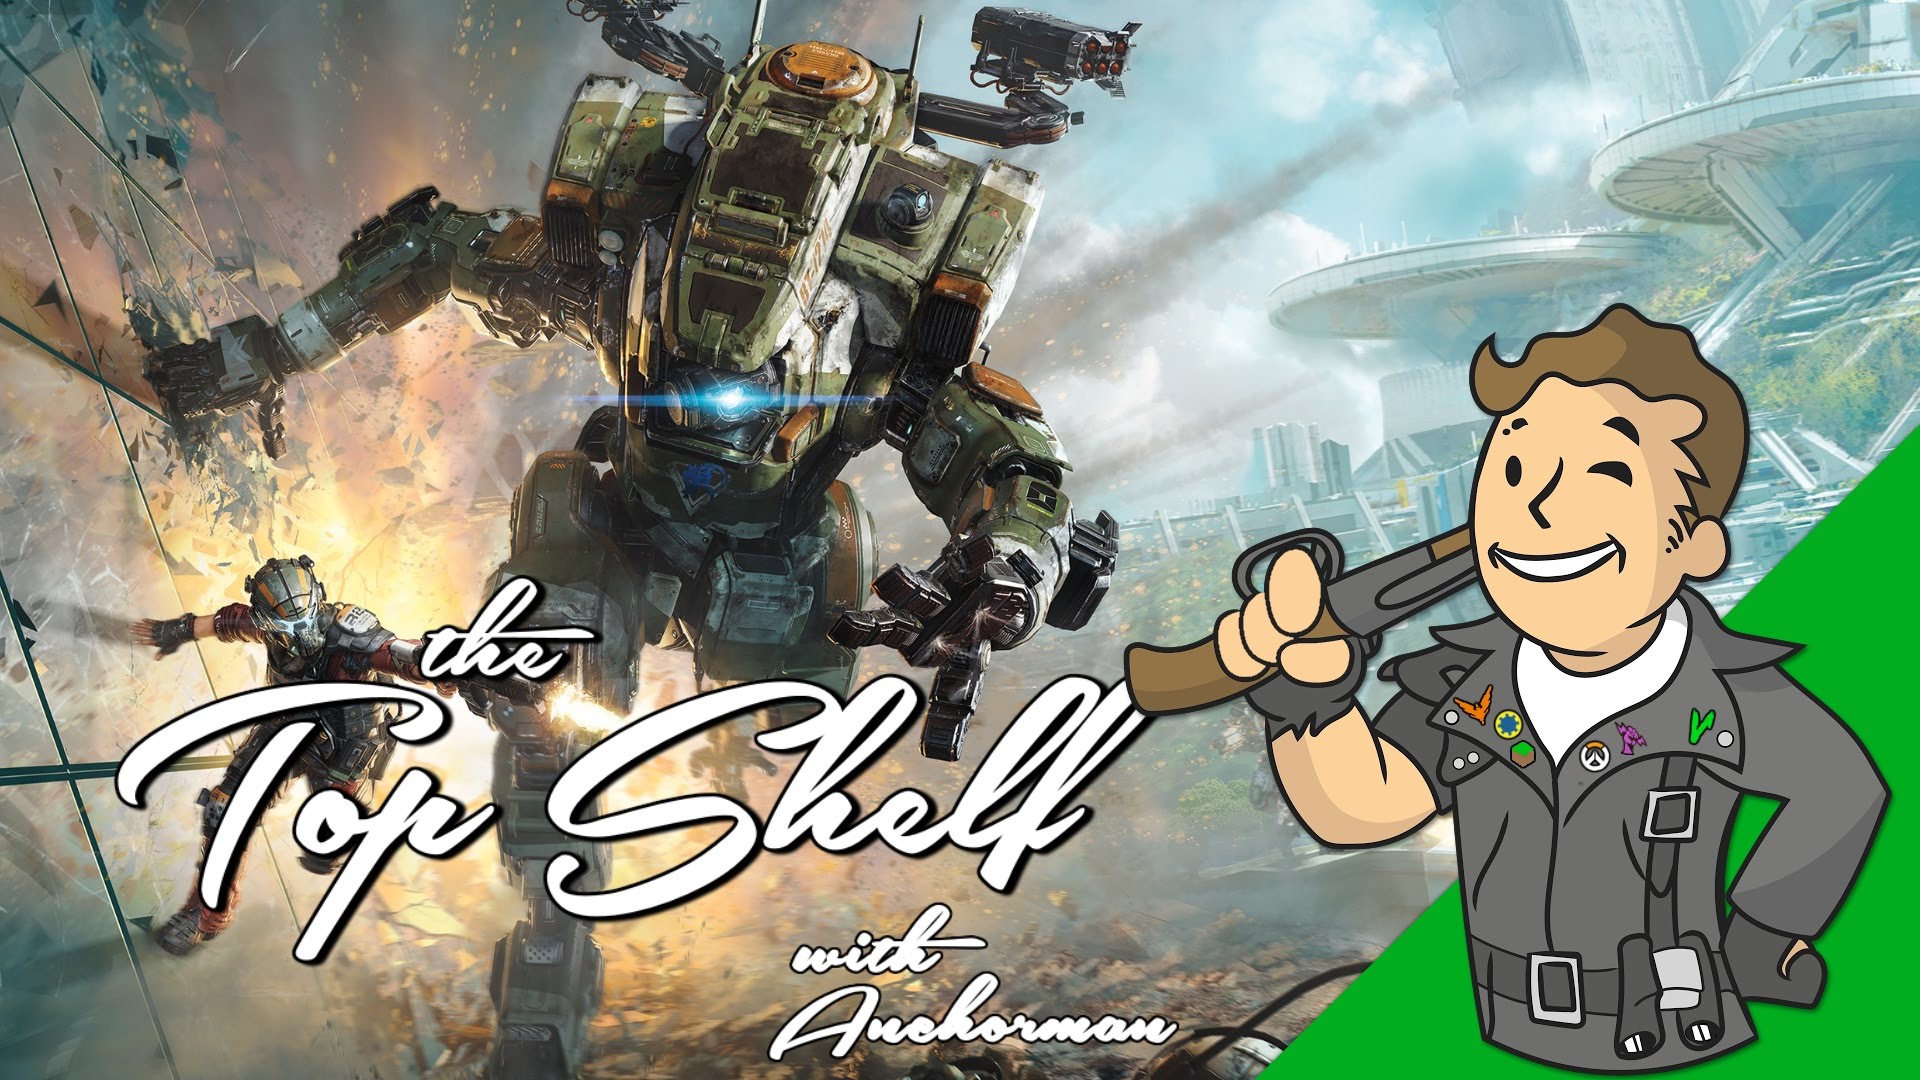 Top Shelf: Why Titanfall Matters - Ep. 10